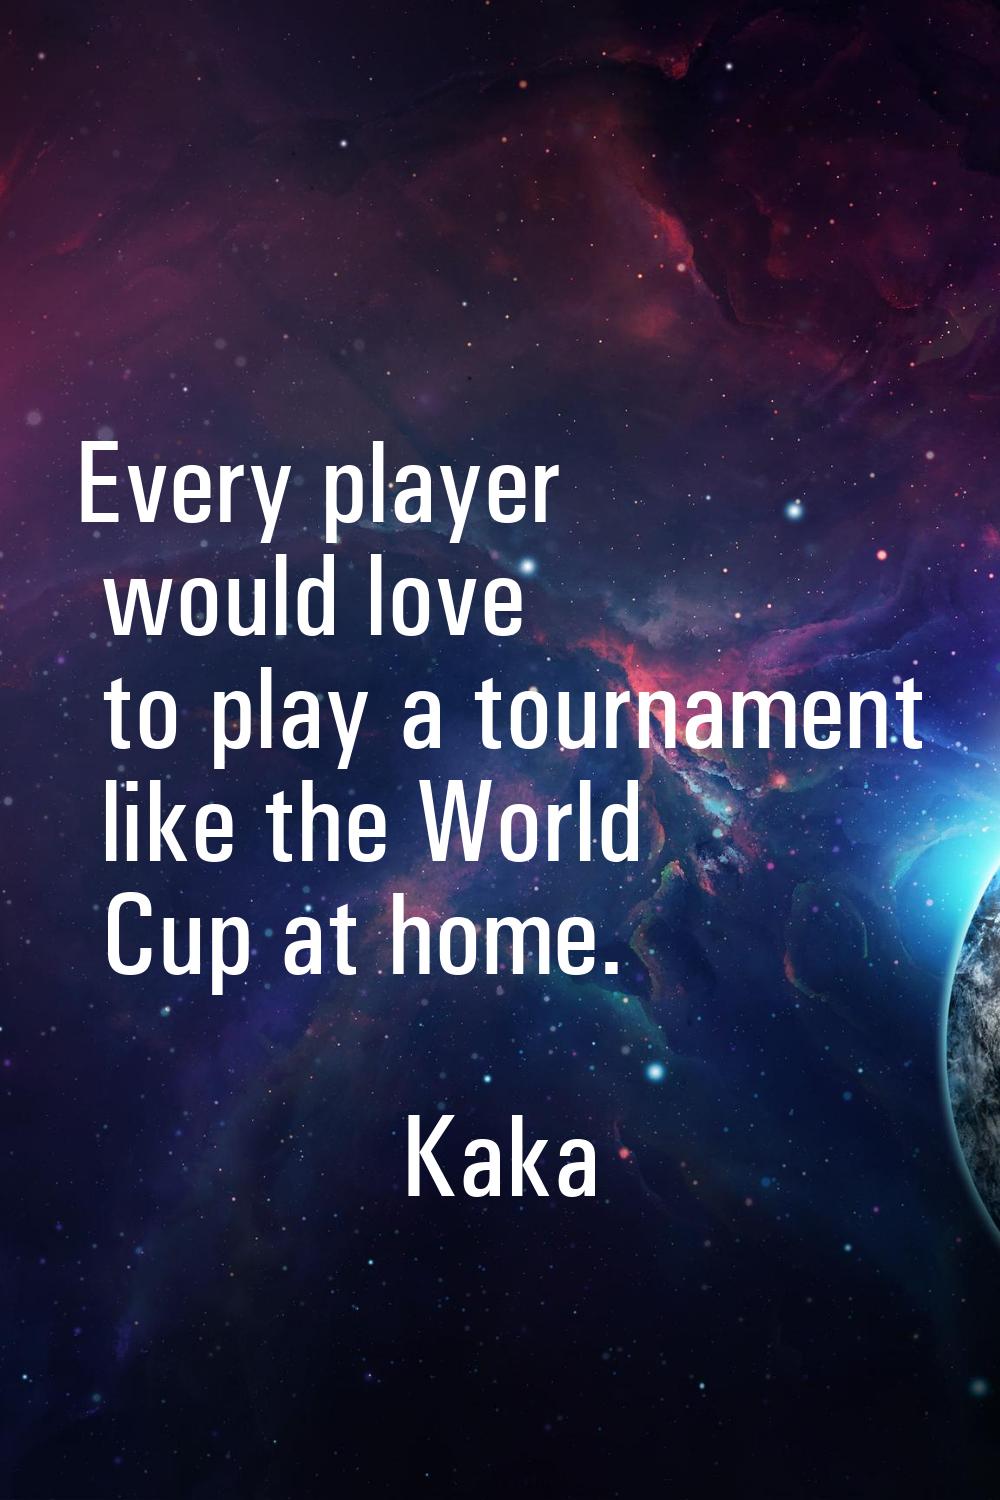 Every player would love to play a tournament like the World Cup at home.